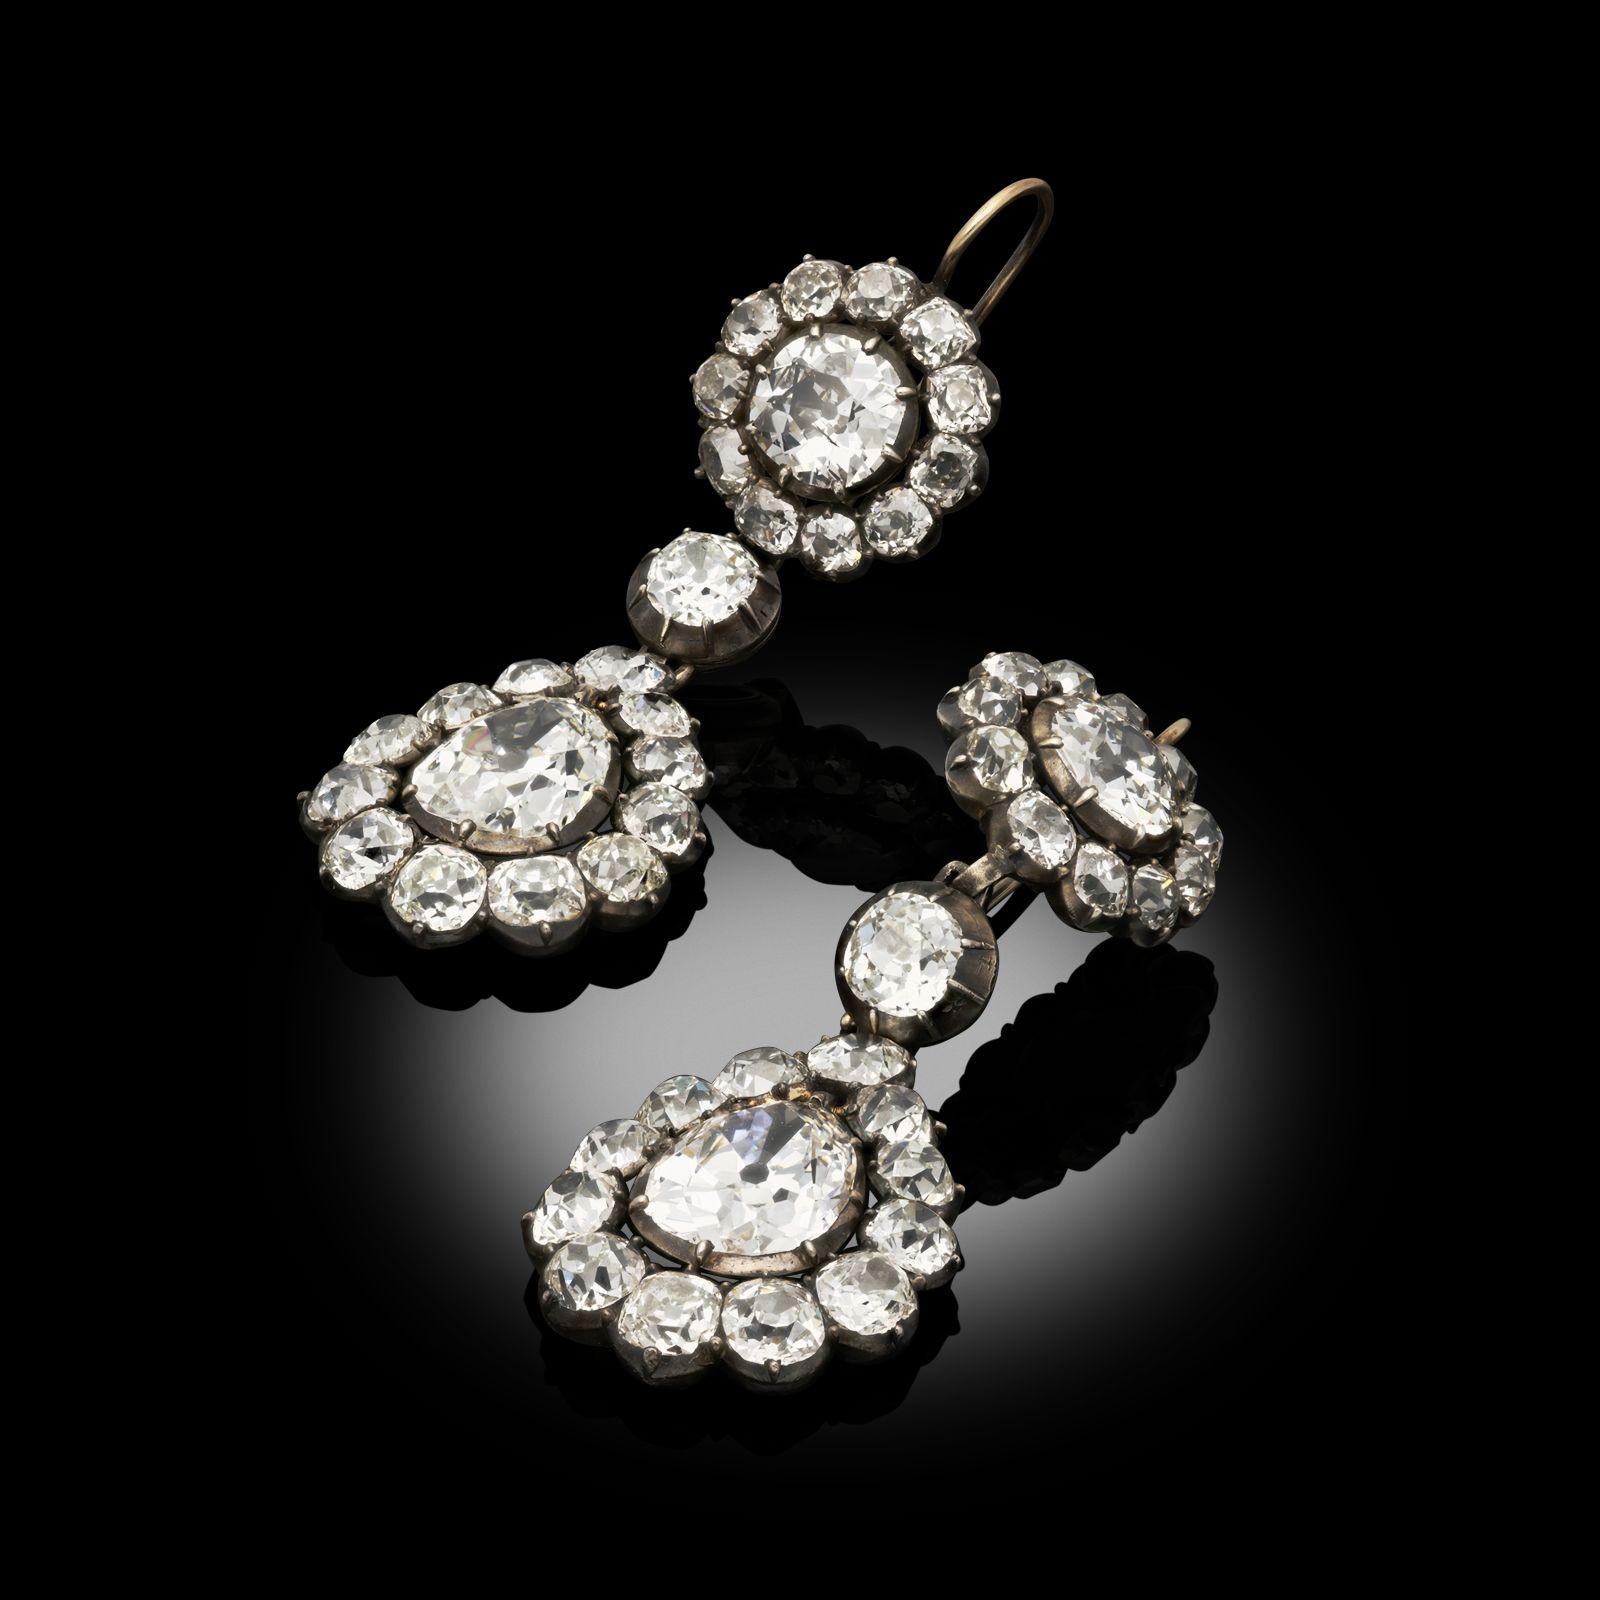 A magnificent pair of Georgian diamond drop earrings c.1800, each earring set to the top with an old European brilliant cut diamond in a cut down collet setting surrounded by a frame of smaller old cut brilliants, beneath which is a single diamond